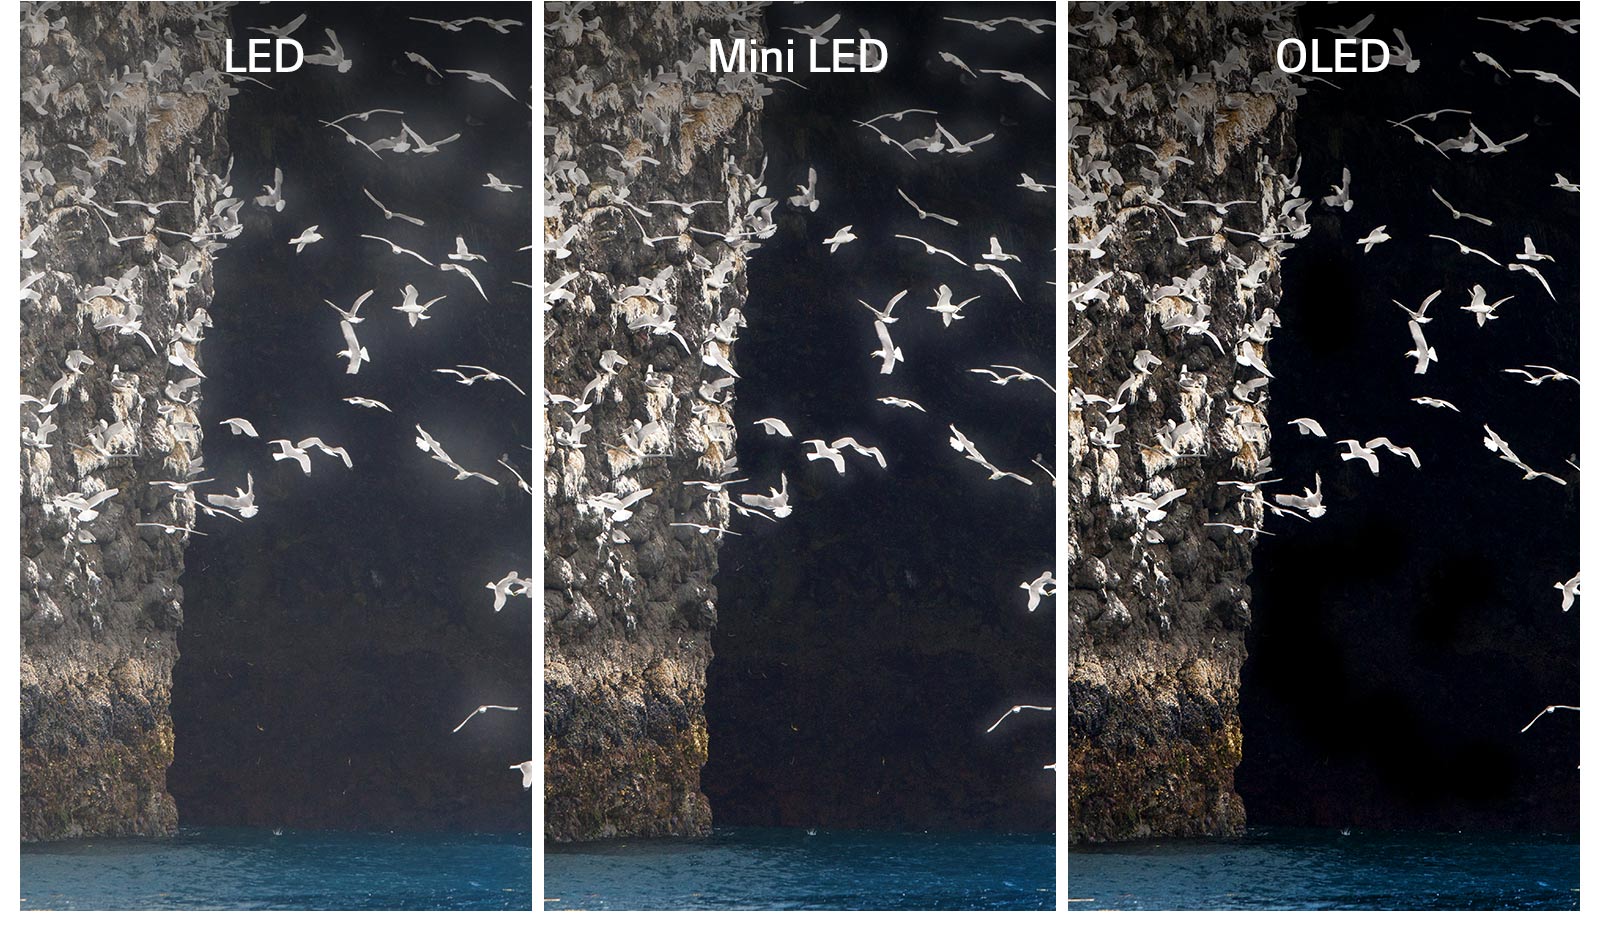 A comparison of LED, Mini LED, and OLED when displaying the same image, a bird flapping the wings on the lake. LED and Mini LED shows halo around the wings of the bird making them look unclear. OLED with perfect black shows the wings clearly.